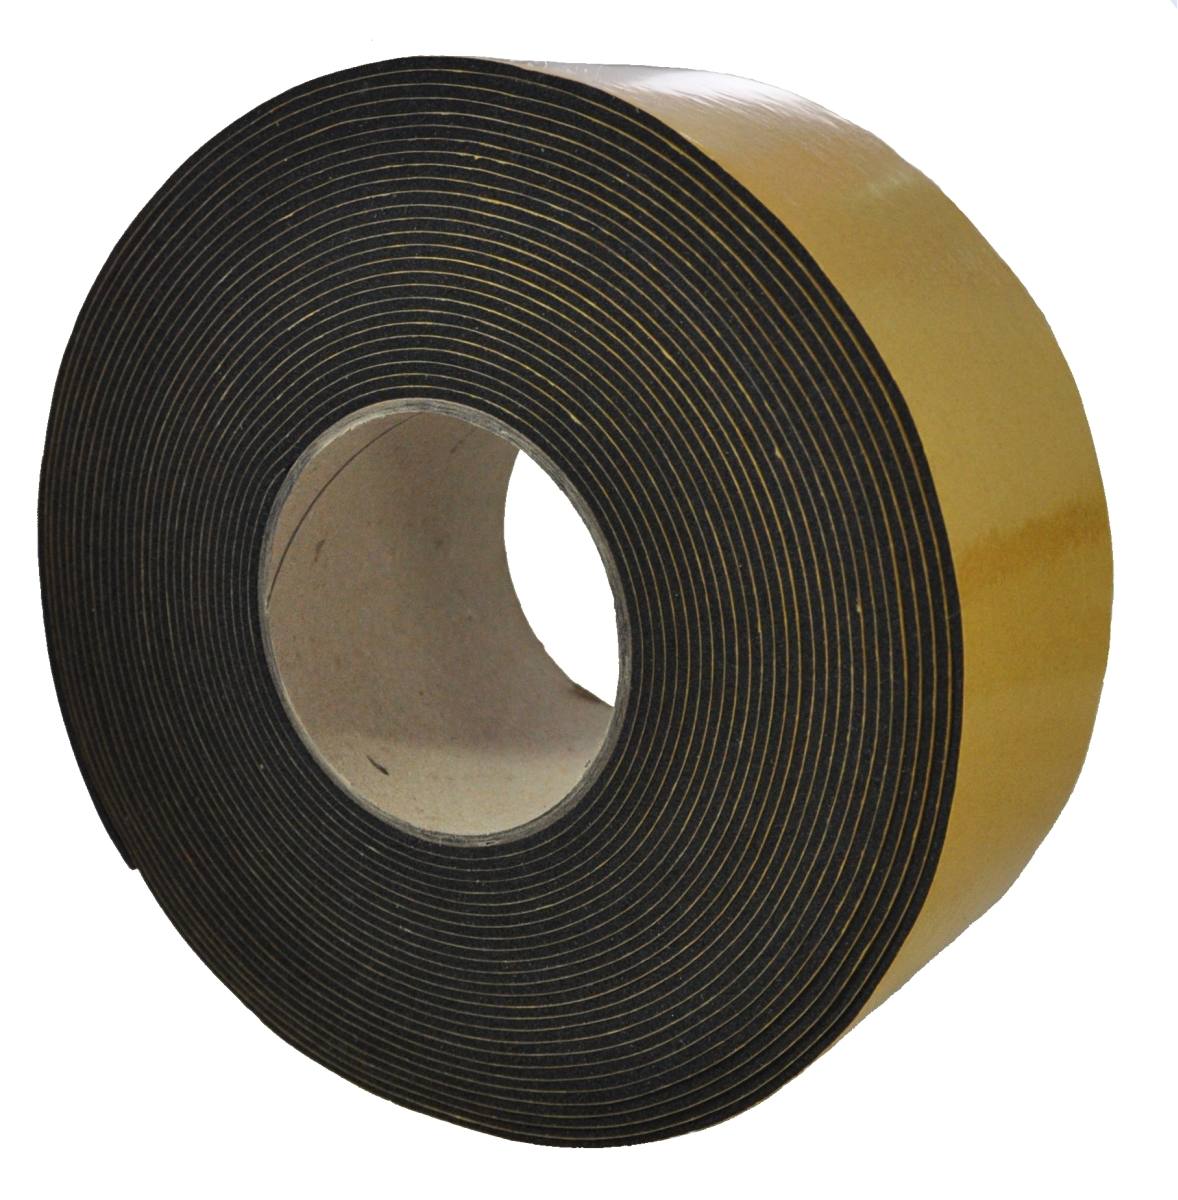 S-K-S EPDM 4mmx12mmx10m black self-adhesive on one side